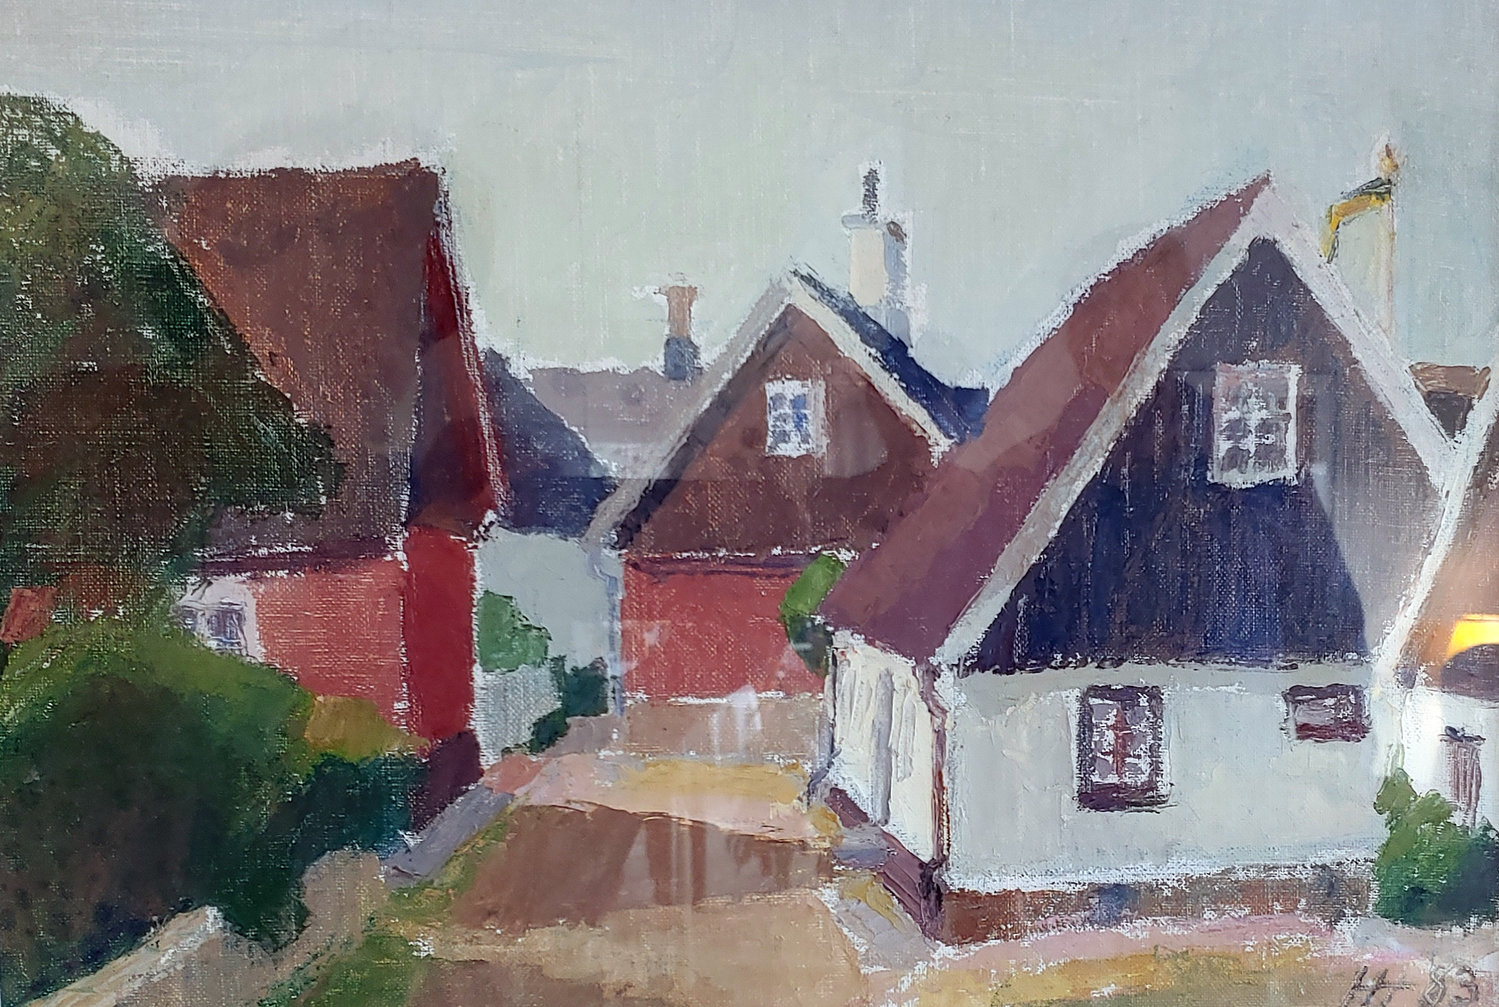 Painting from 1983 of Lisa's childhood home on right